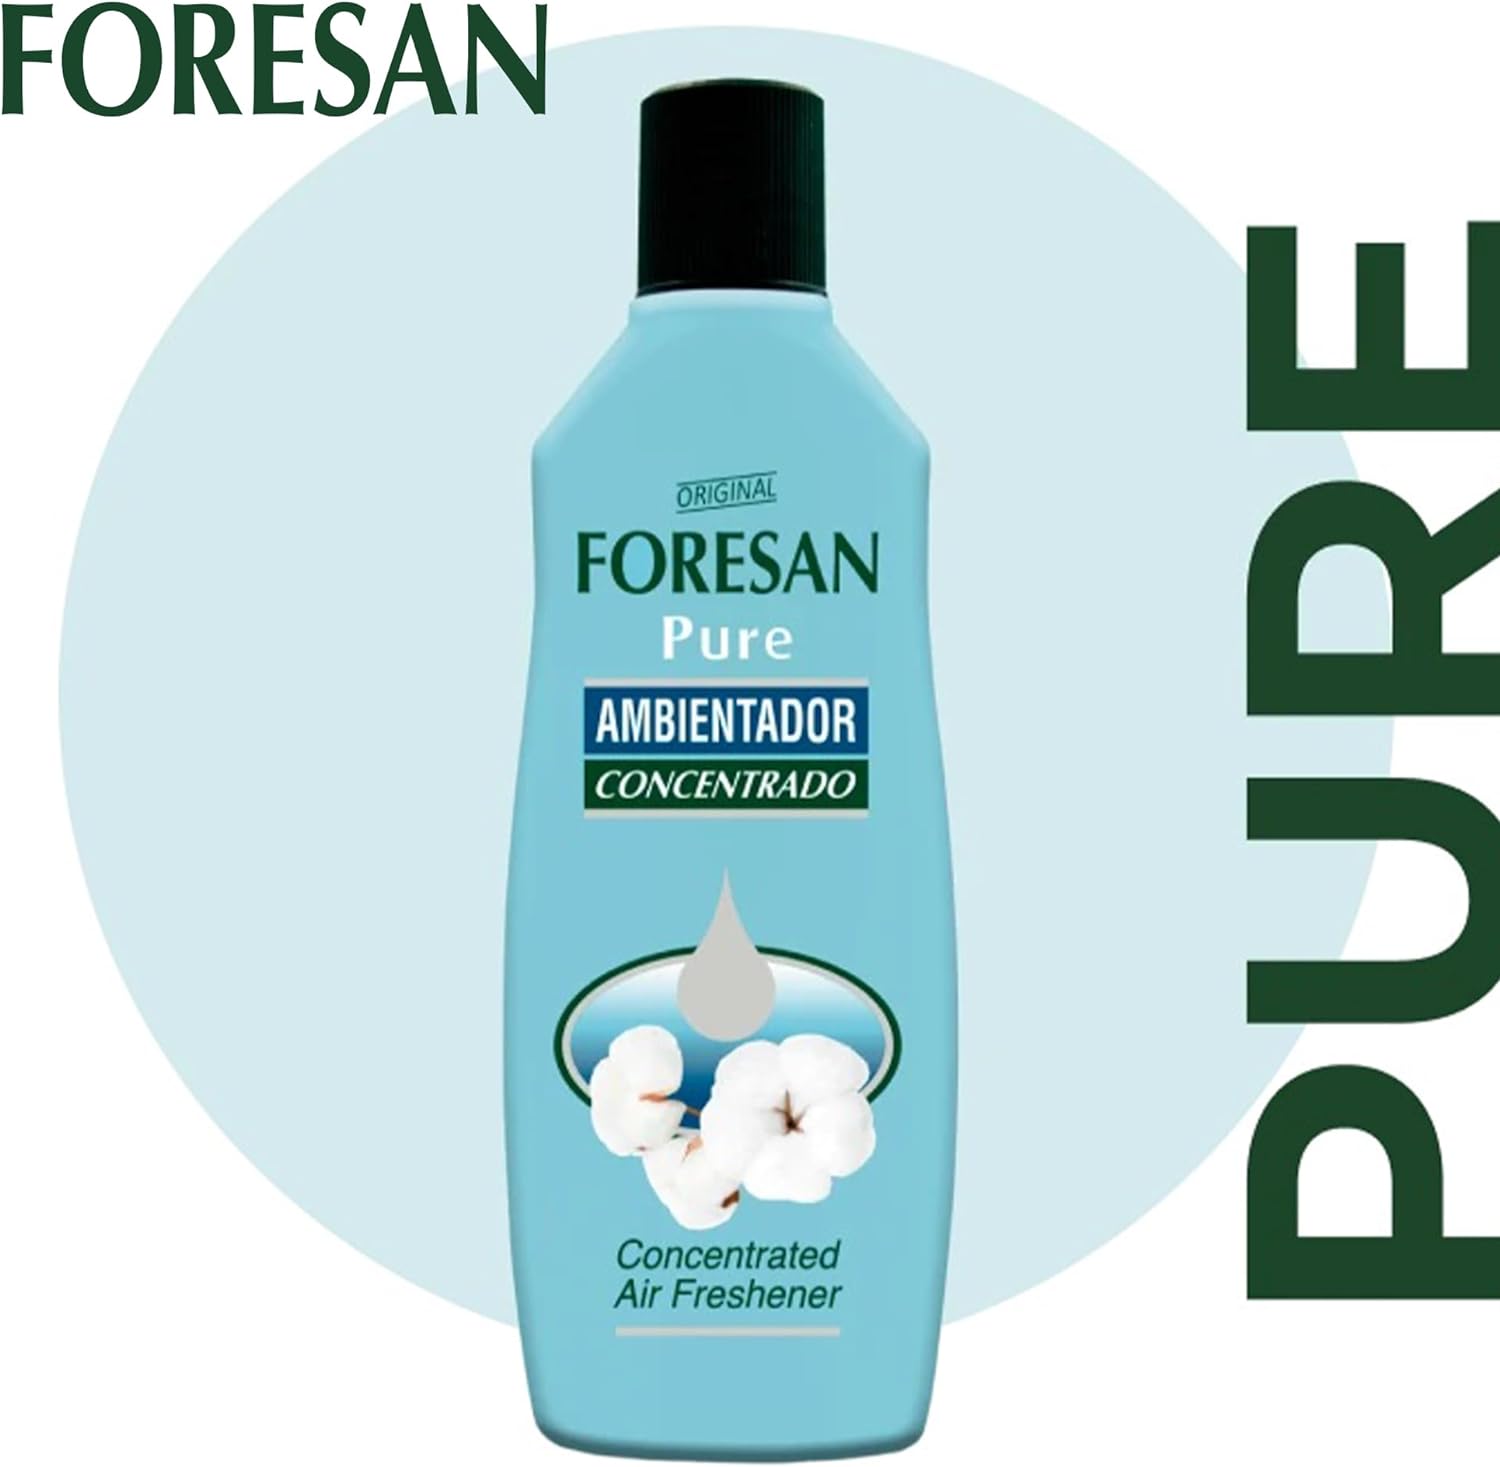 Foresan Concentrated Air Freshner 125ml Pure